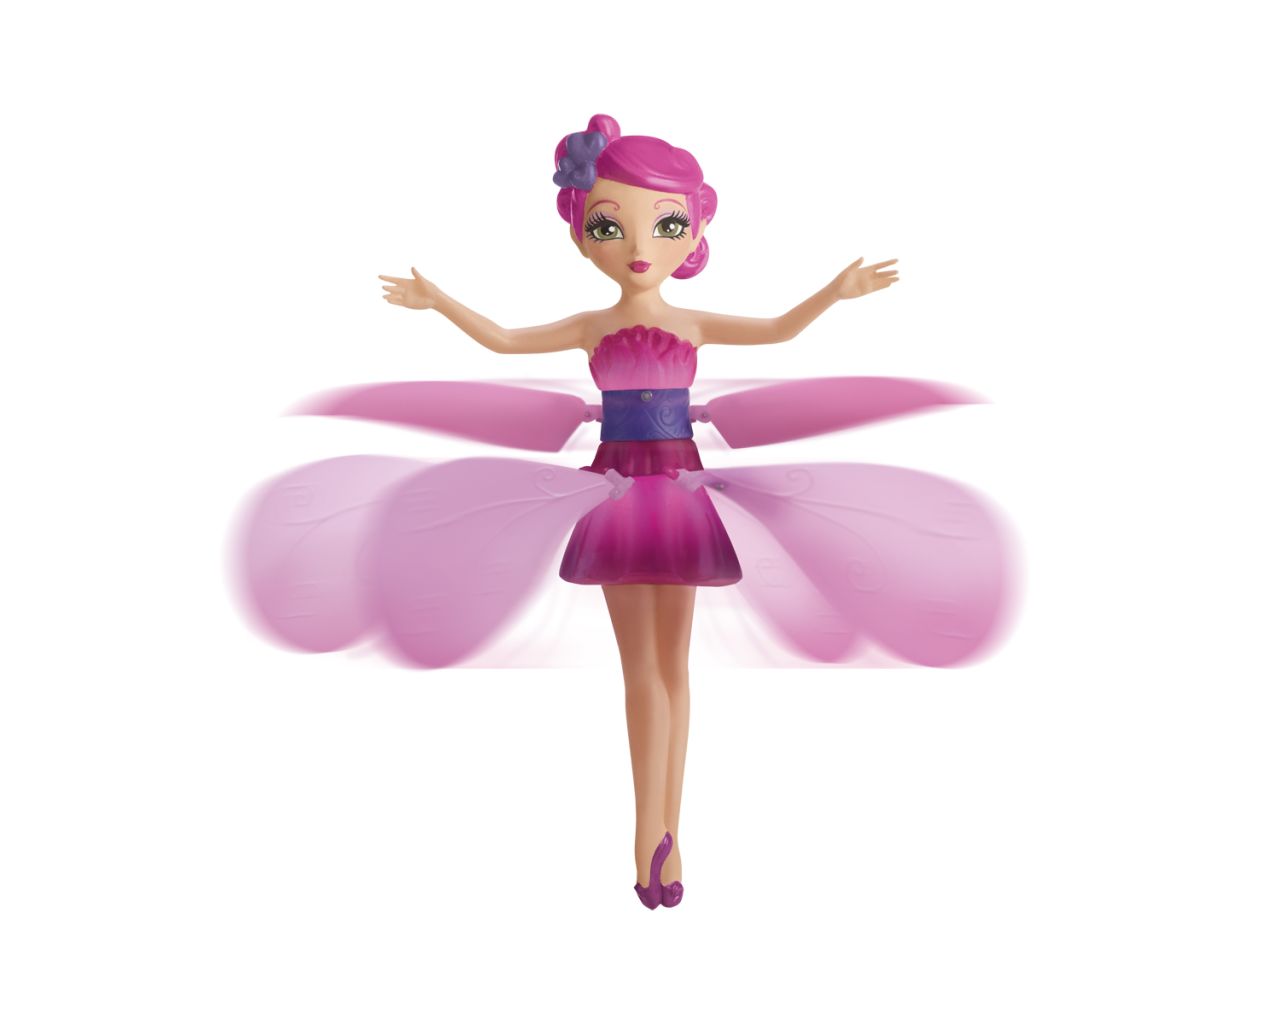 Looking for something a bit more delicate? How about a flying fairy that you control by moving your hand underneath it. It's high tech in shiny pink packaging. Toys 'R' Us and the UK Toy Retailers Association have named it as one of their hottest toys in 2013.<br /><br /><em>Price: Around $29.99</em>